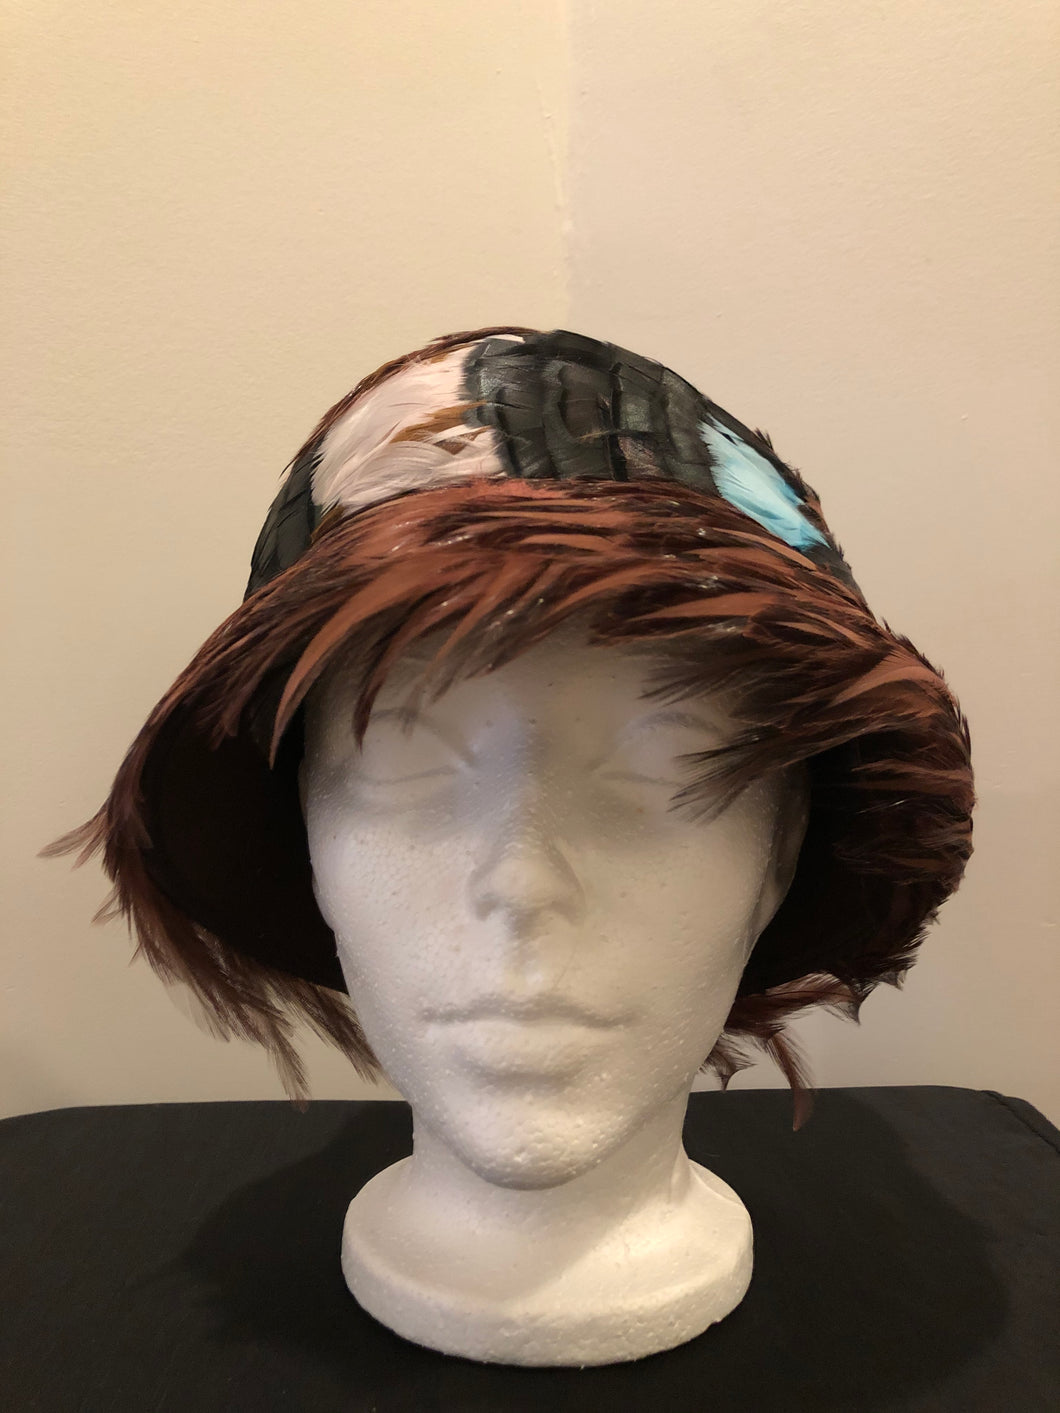 Kingspier Vintage - Vintage brown felt hat with black, brown, blue and pink feathers. No tags.

Circumference - 21” 

Hat is in excellent vintage condition.